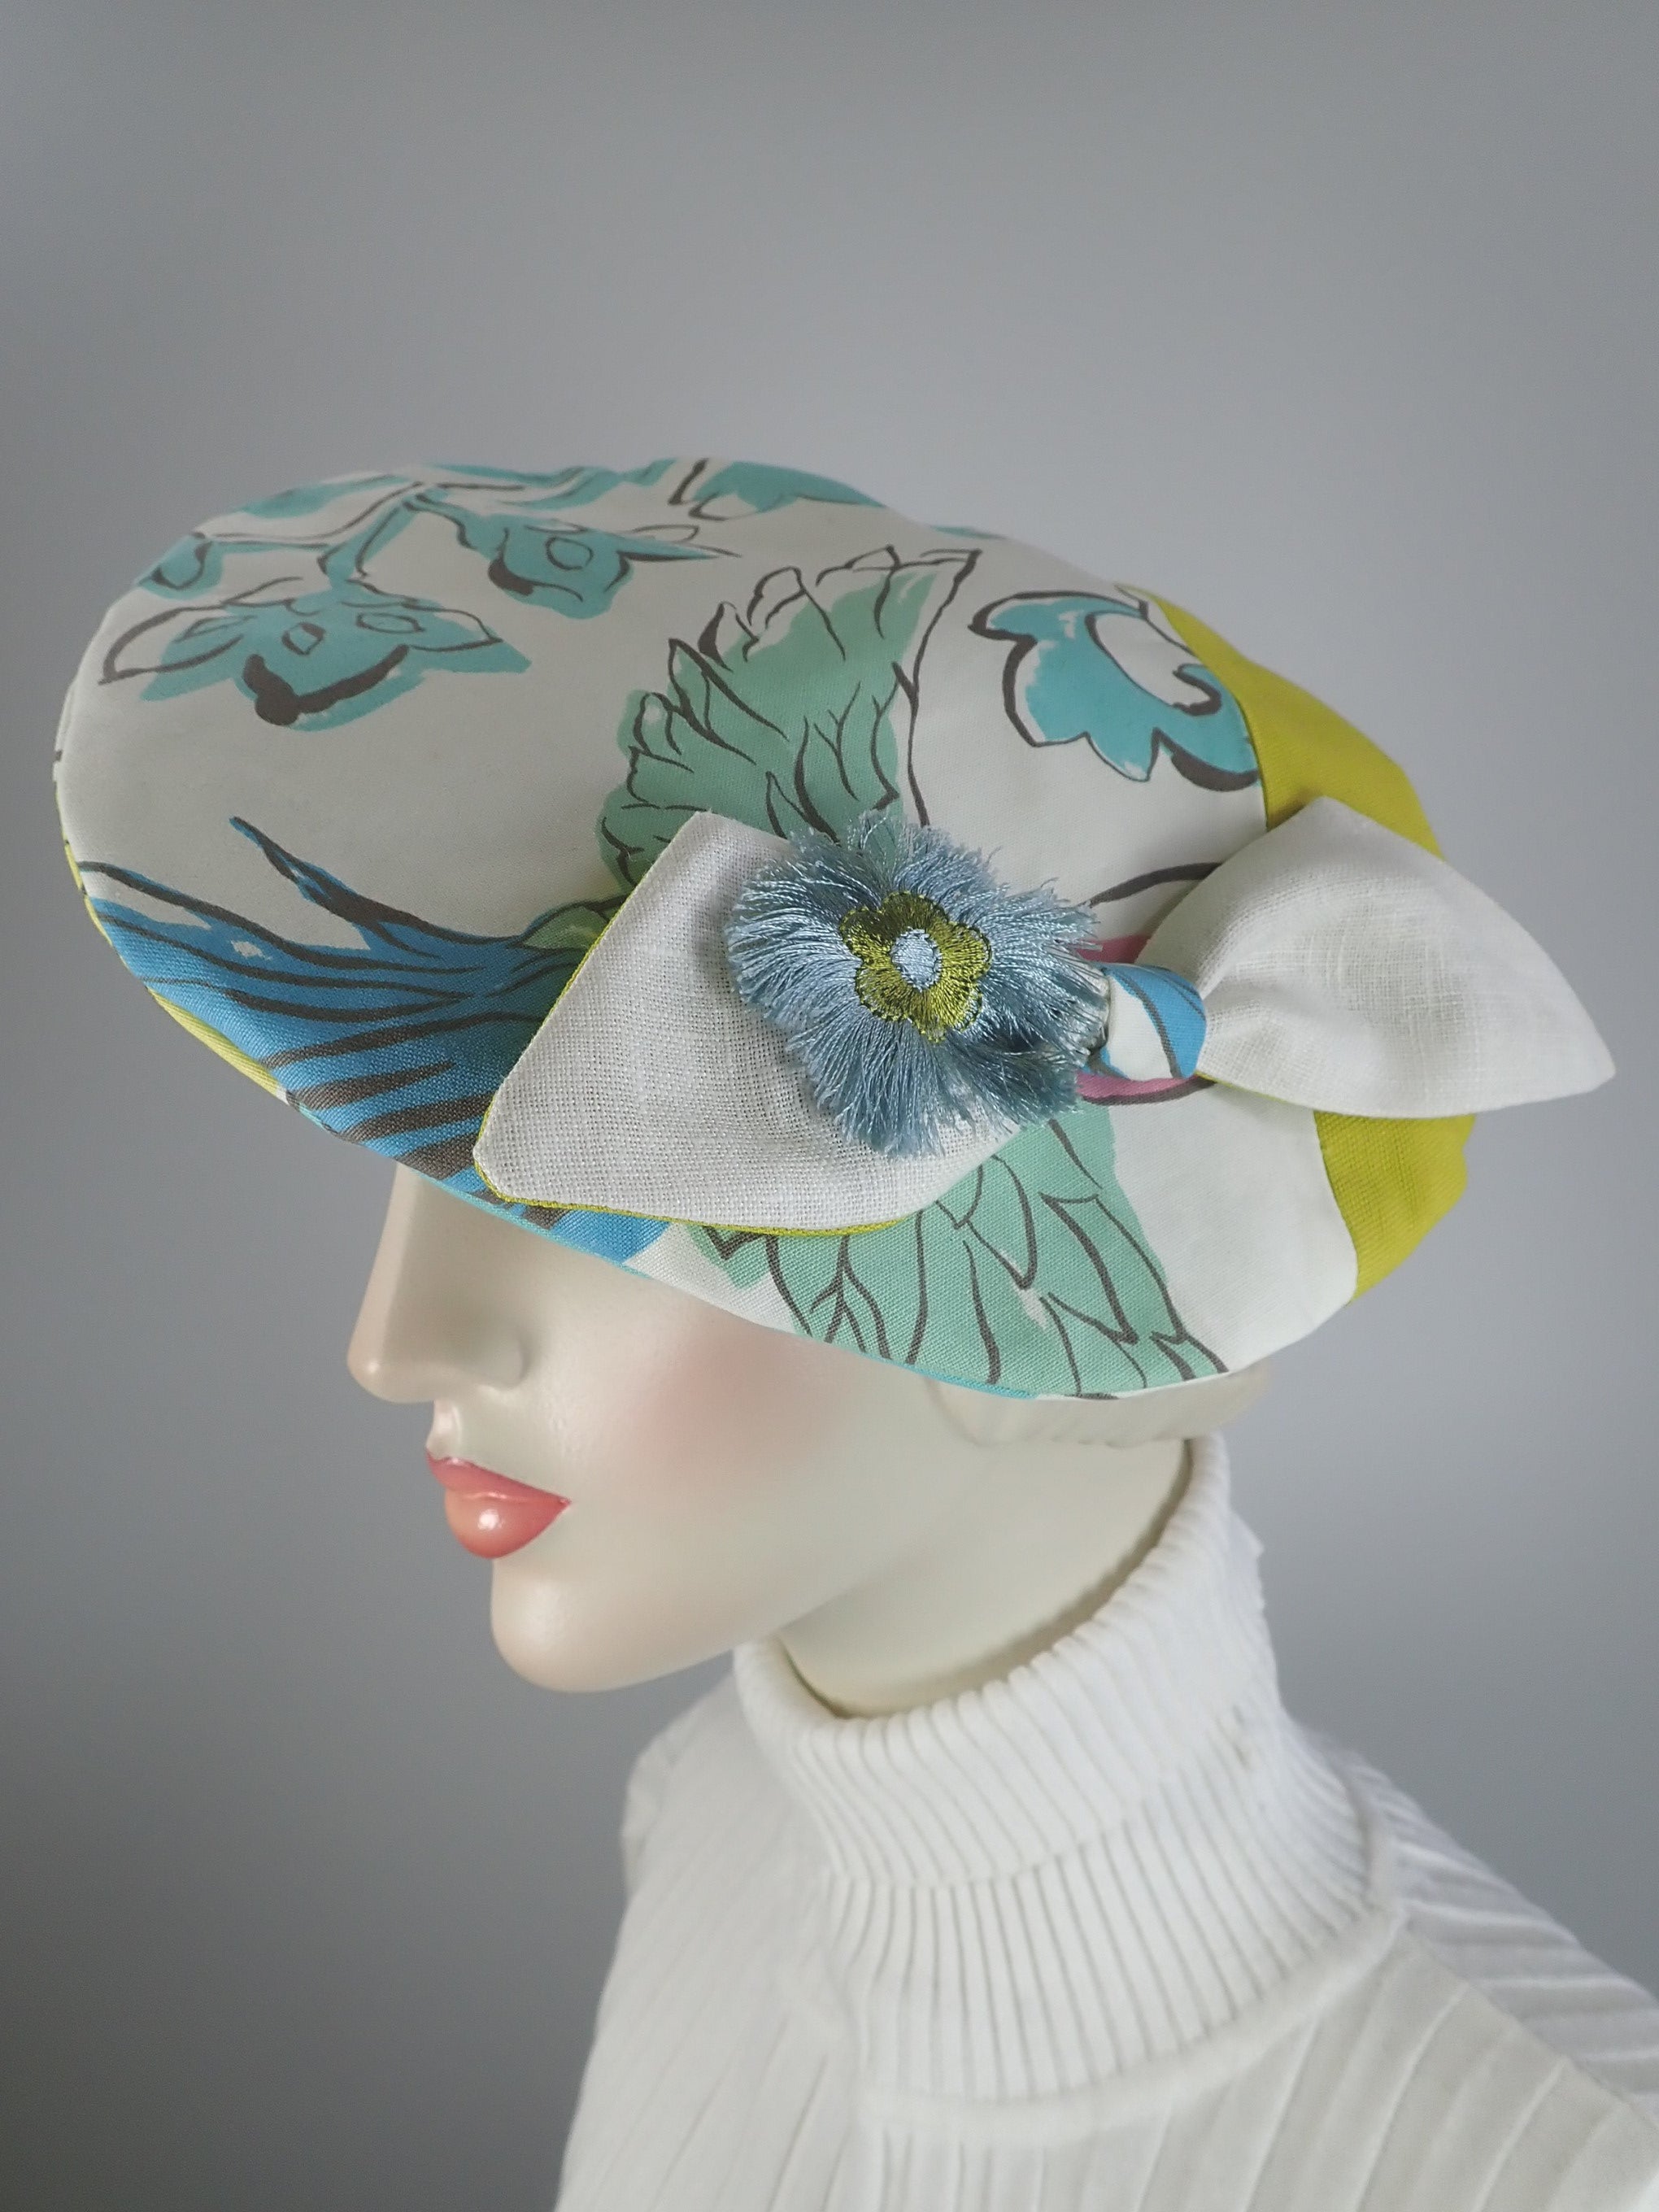 funky fun beret hat 1940s style floral